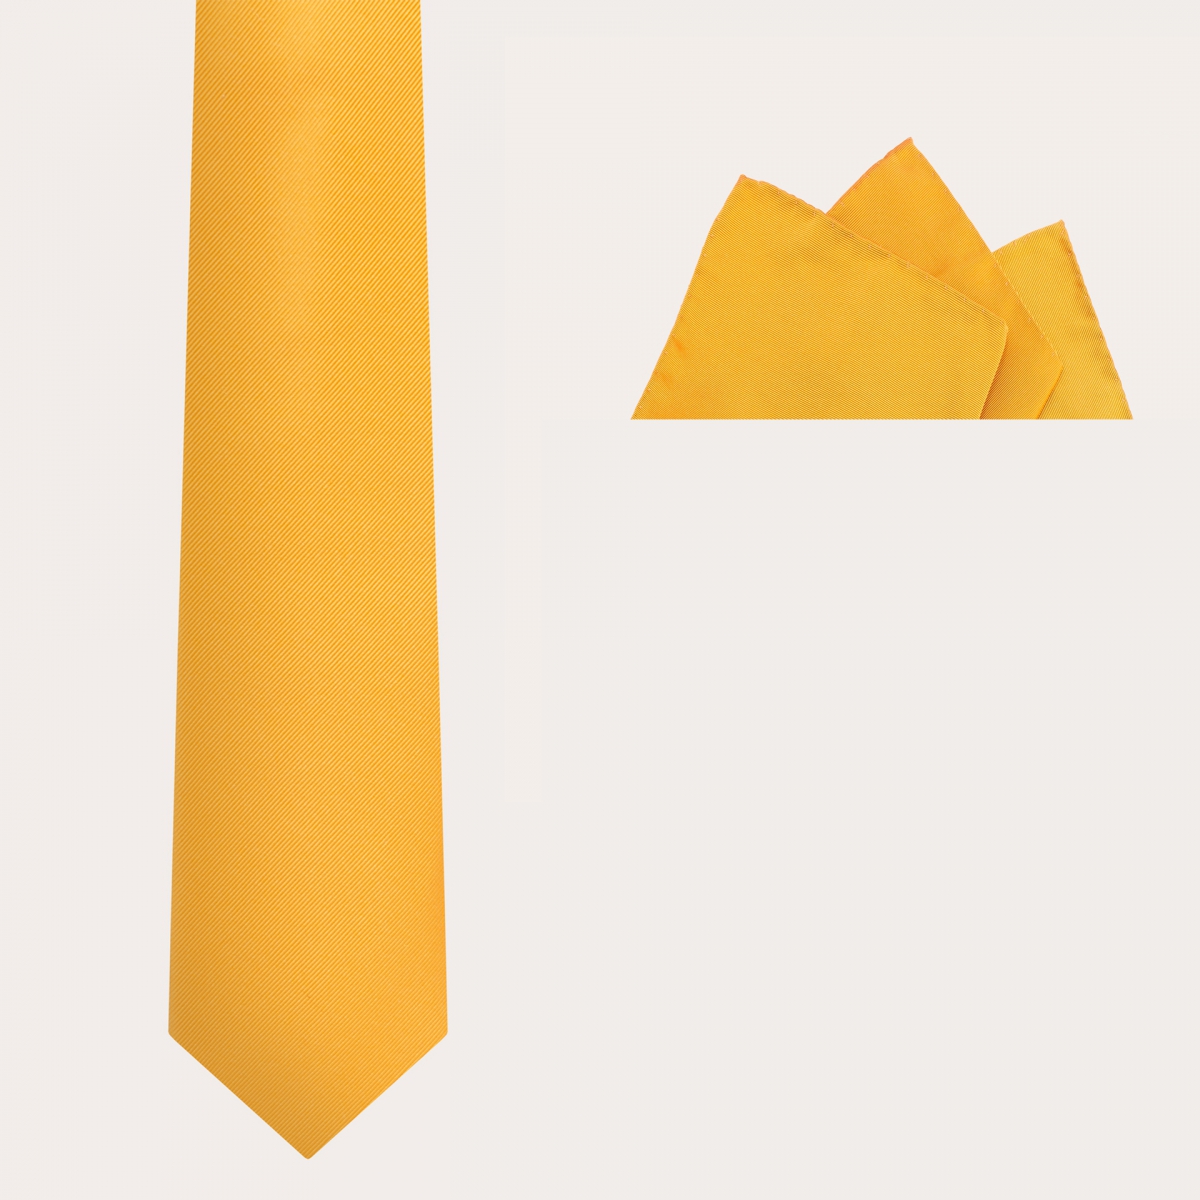 BRUCLE Ceremony set tie and pocket square, yellow